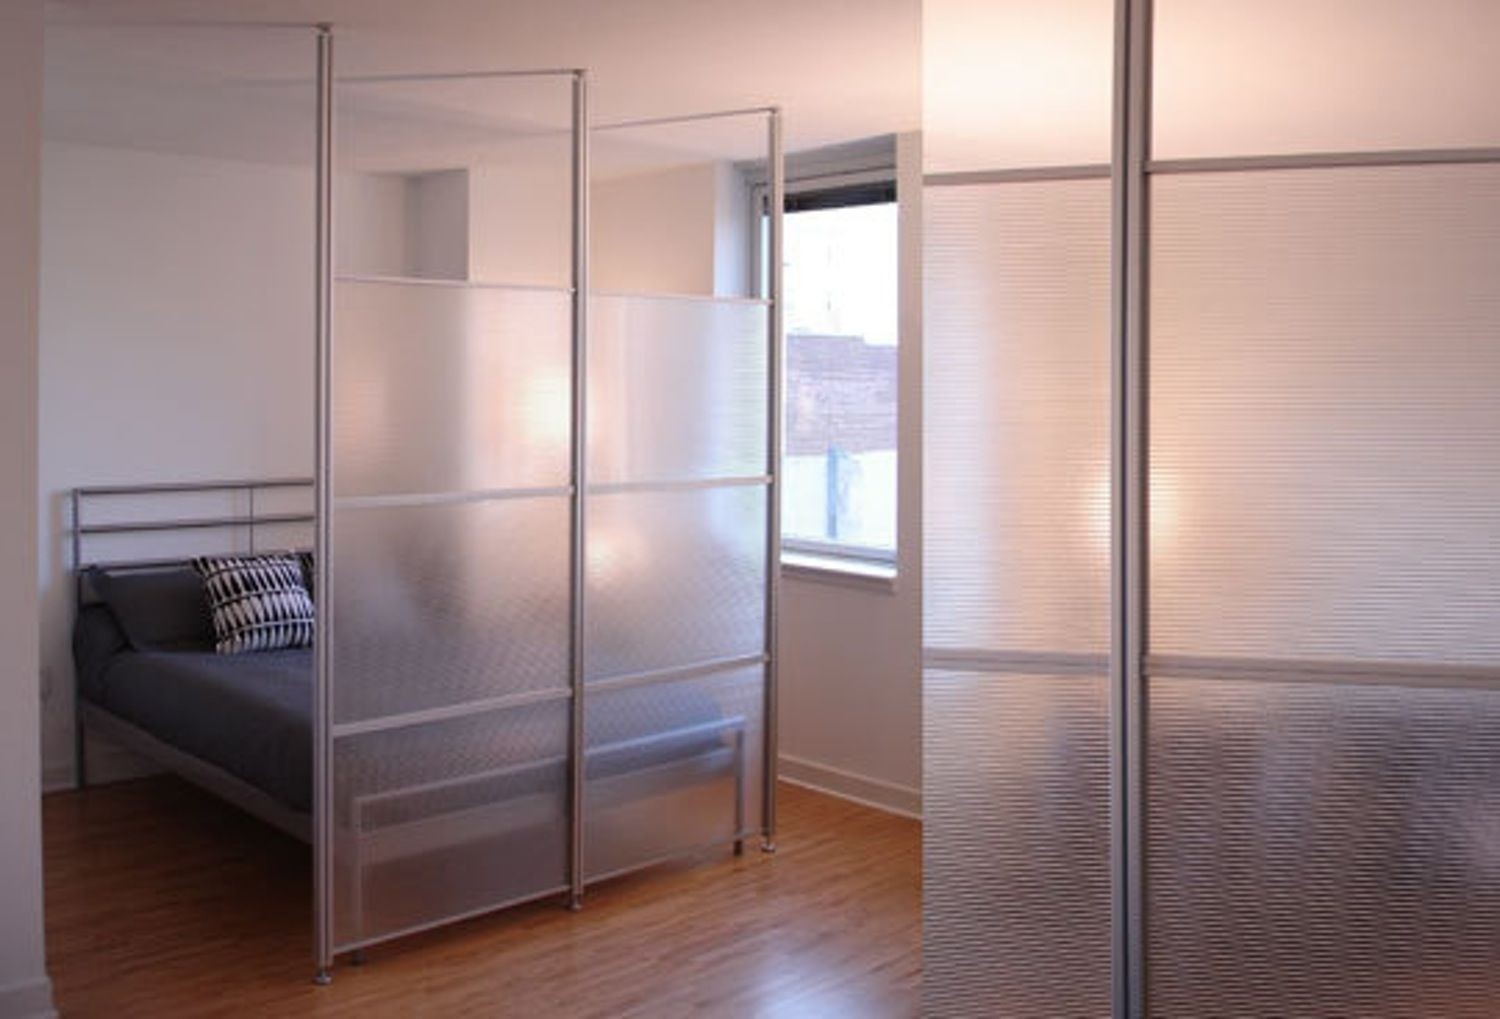 Temporary room dividers uses and ideas